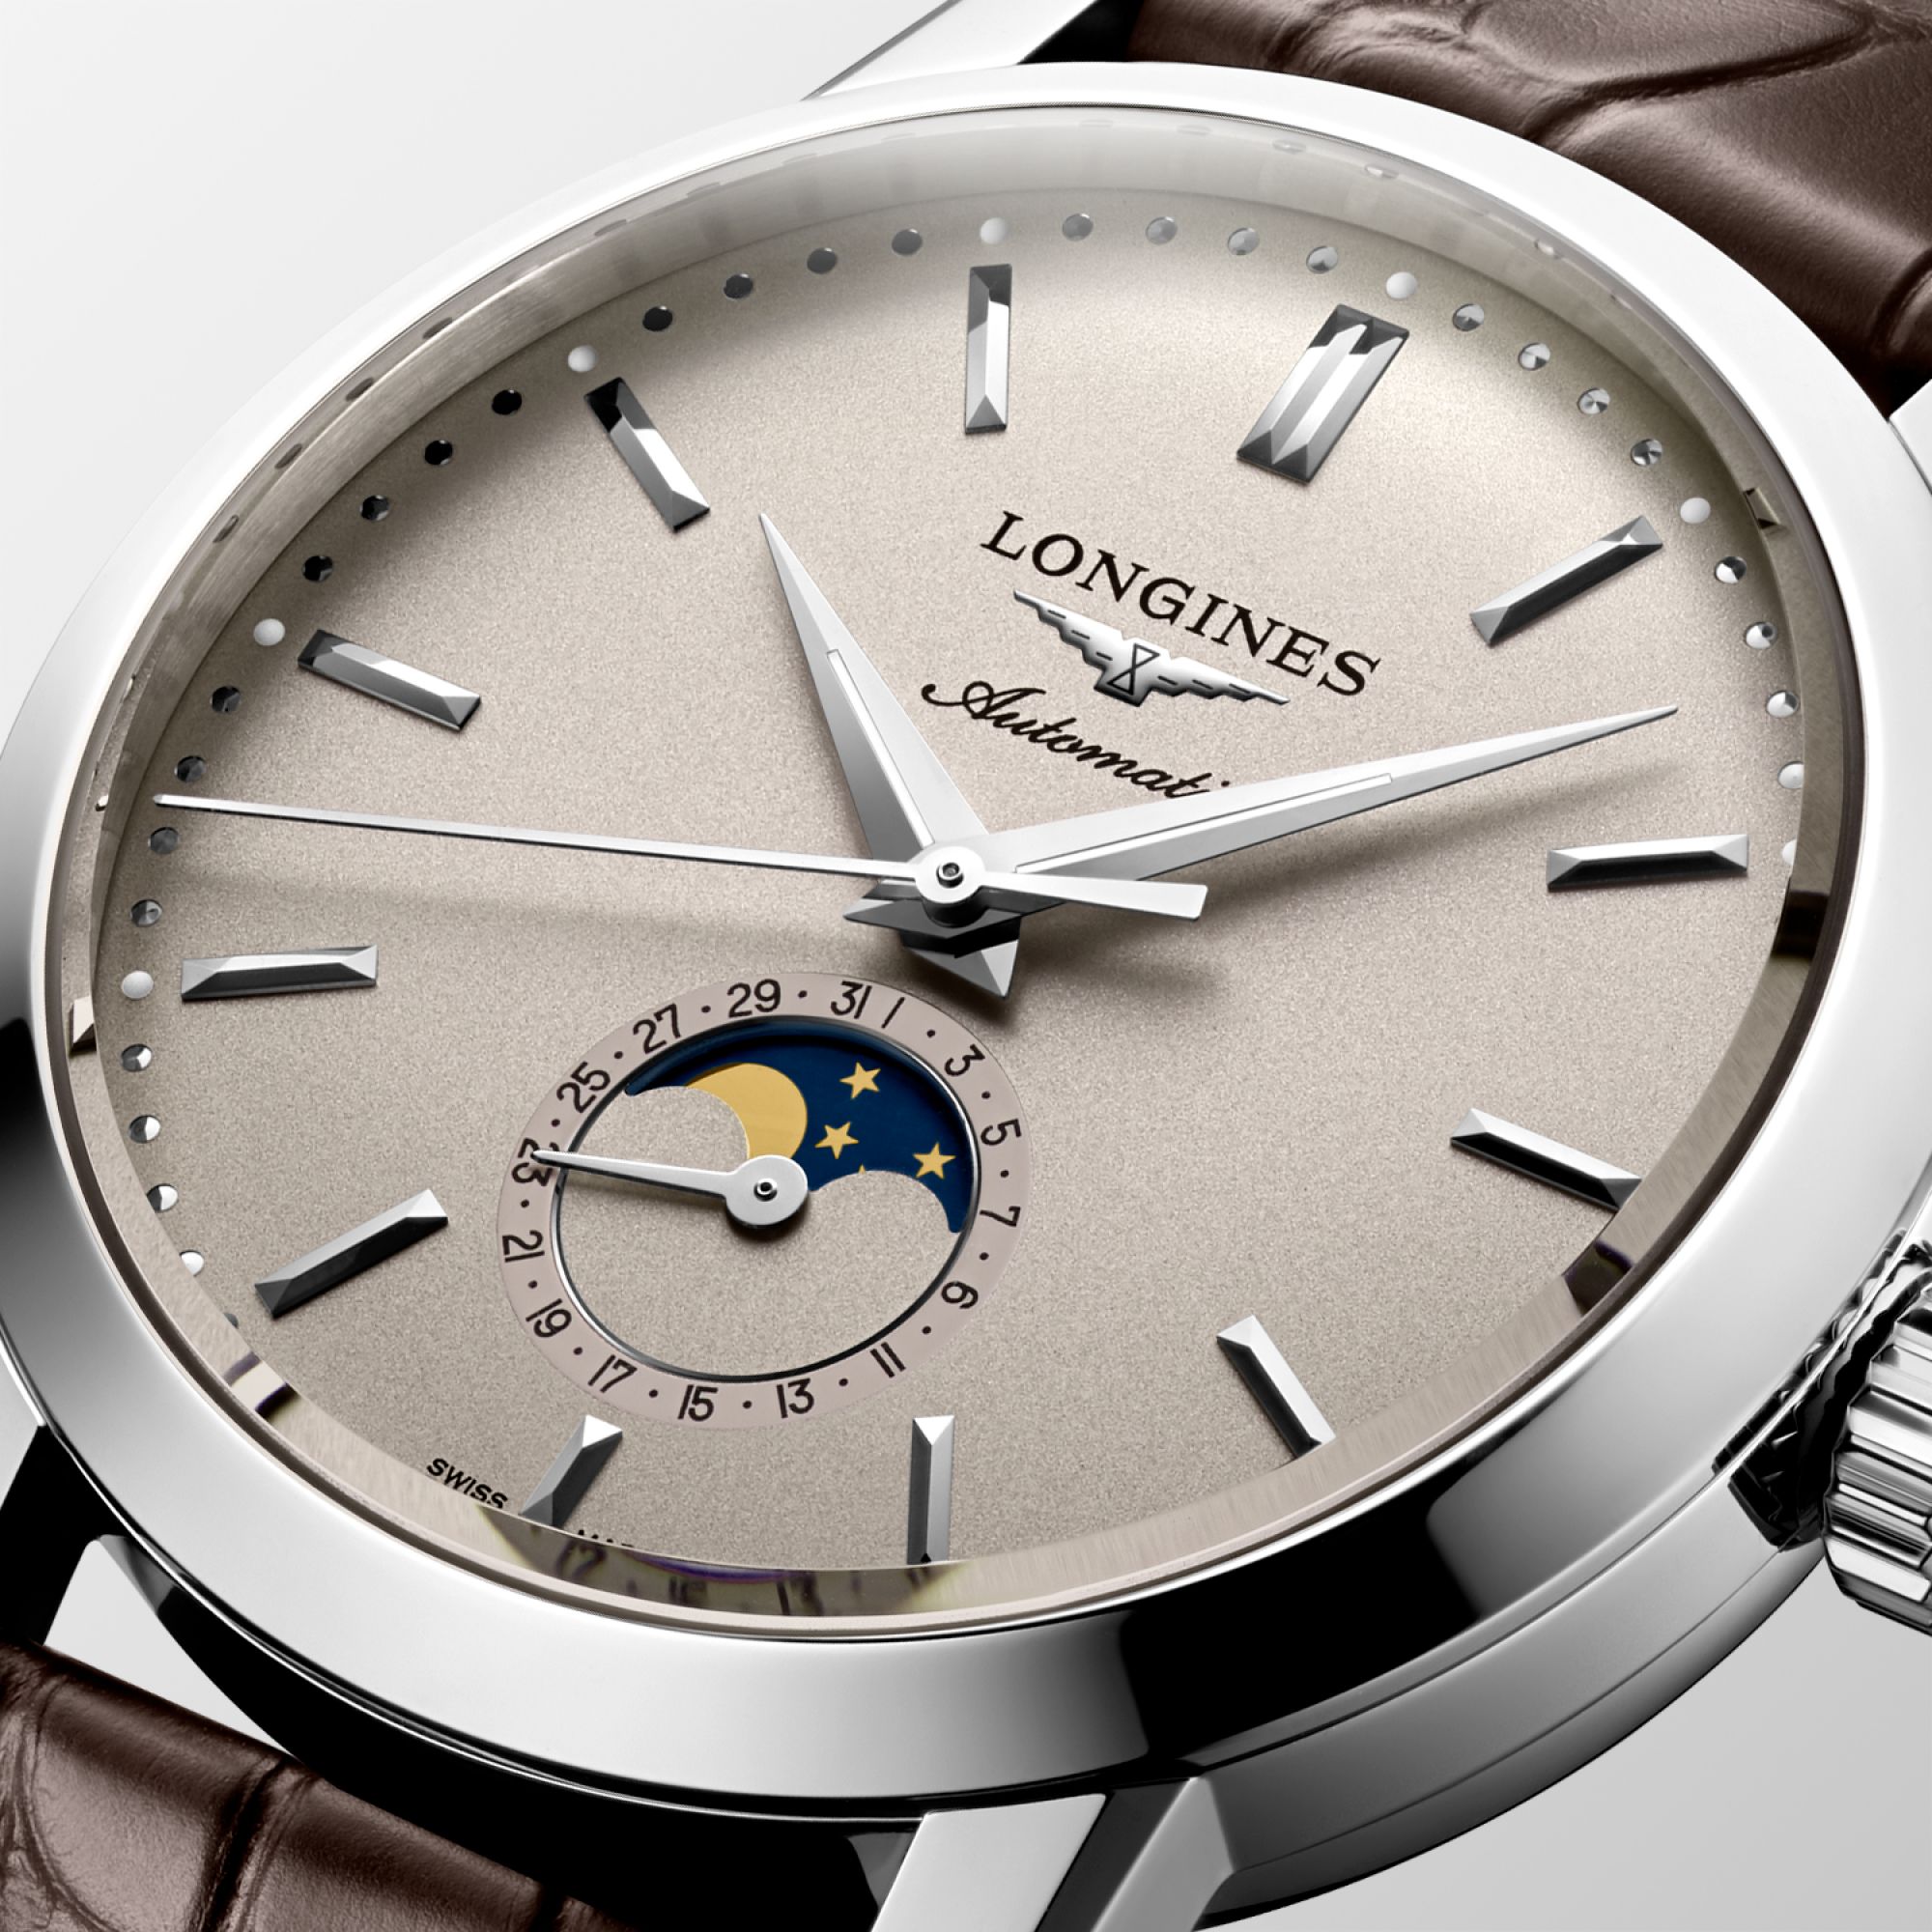 The Longines 1832 Watchmaking Tradition Référence :  L4.826.4.92.2 -4